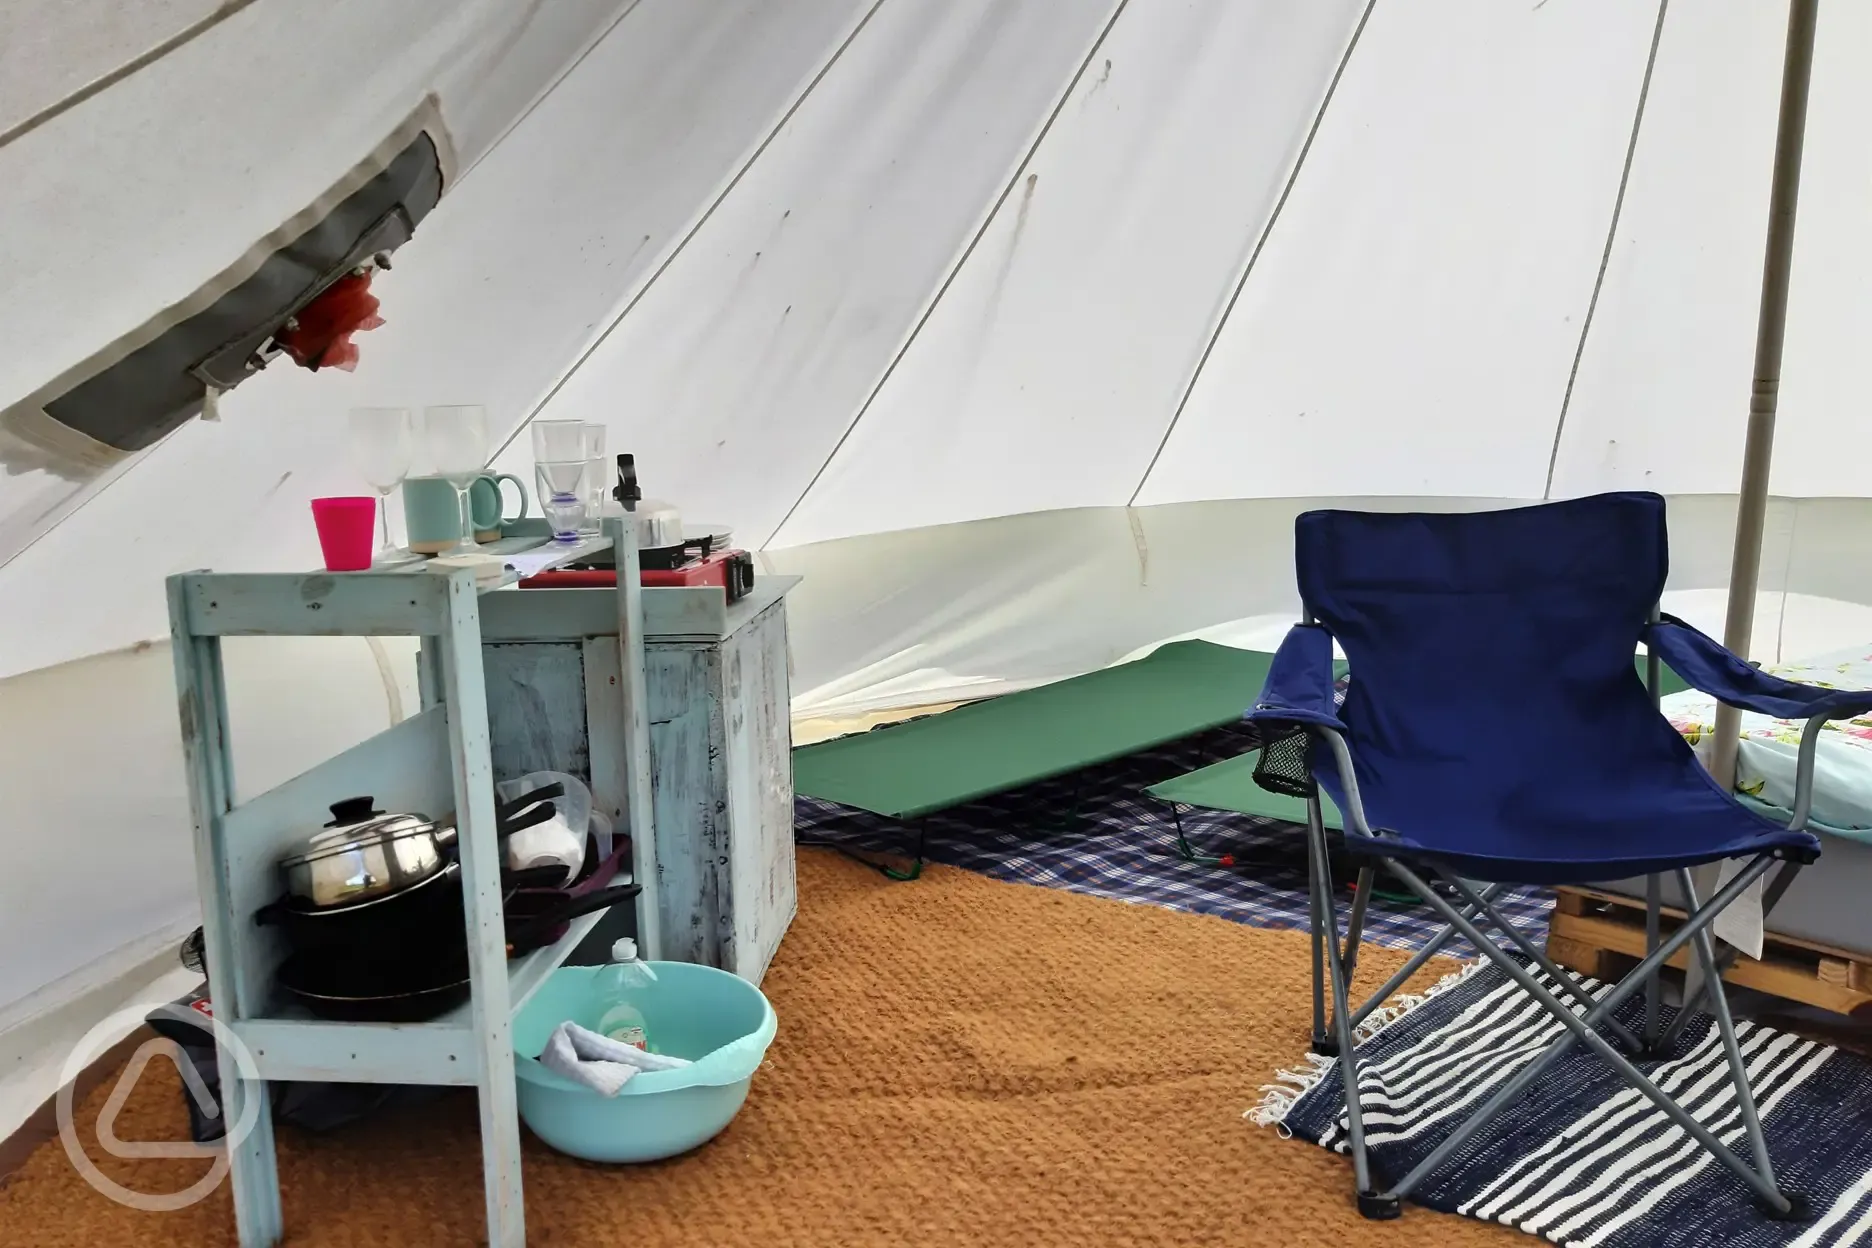 Inside the Bell Tent